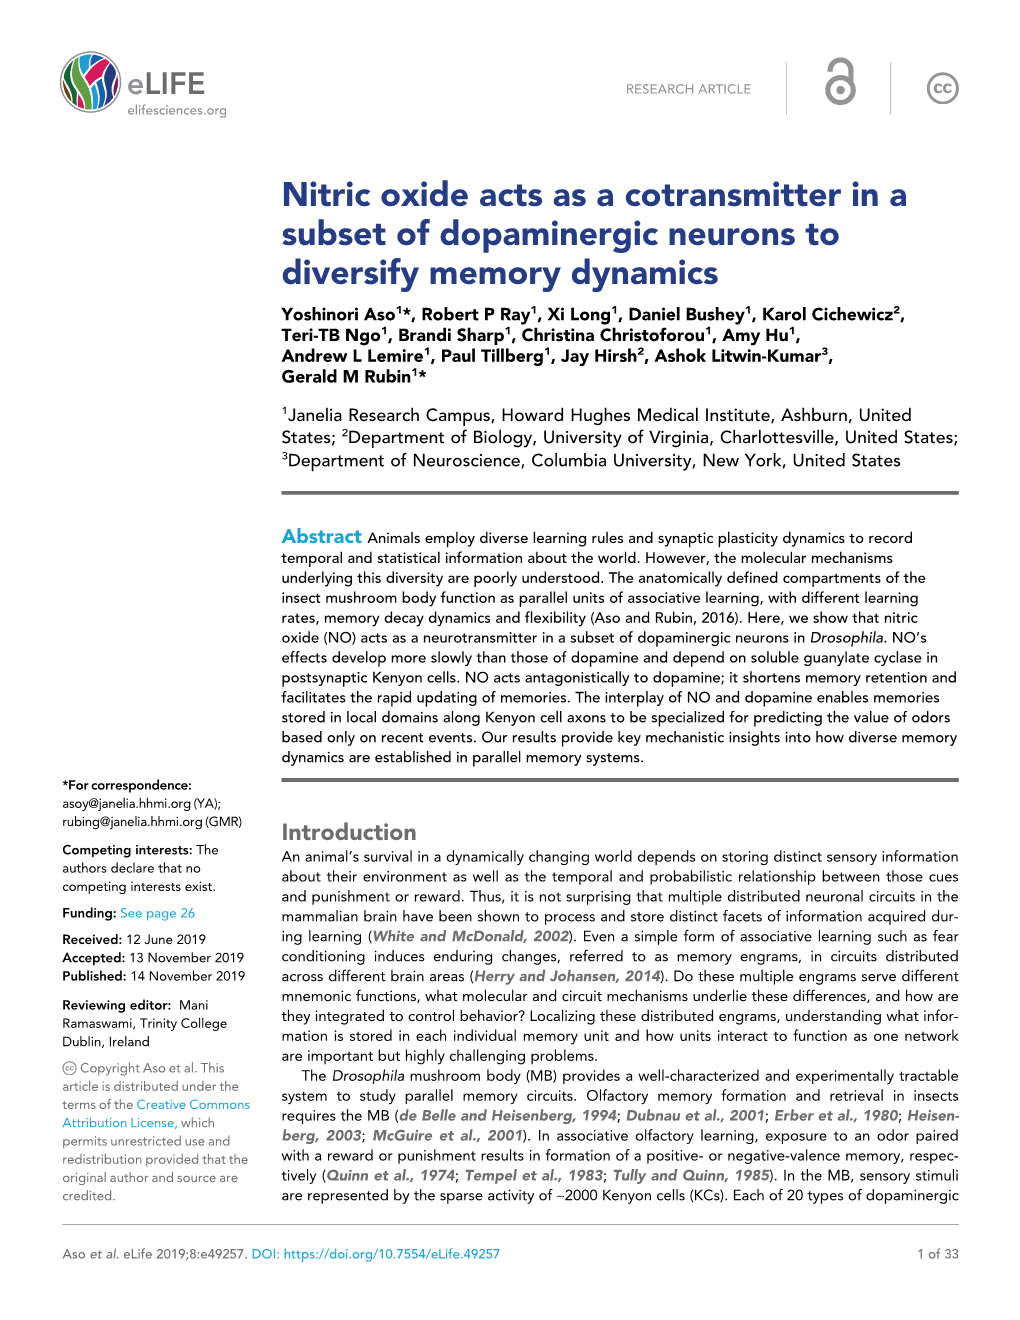 Nitric Oxide Acts As a Cotransmitter in a Subset of Dopaminergic Neurons To